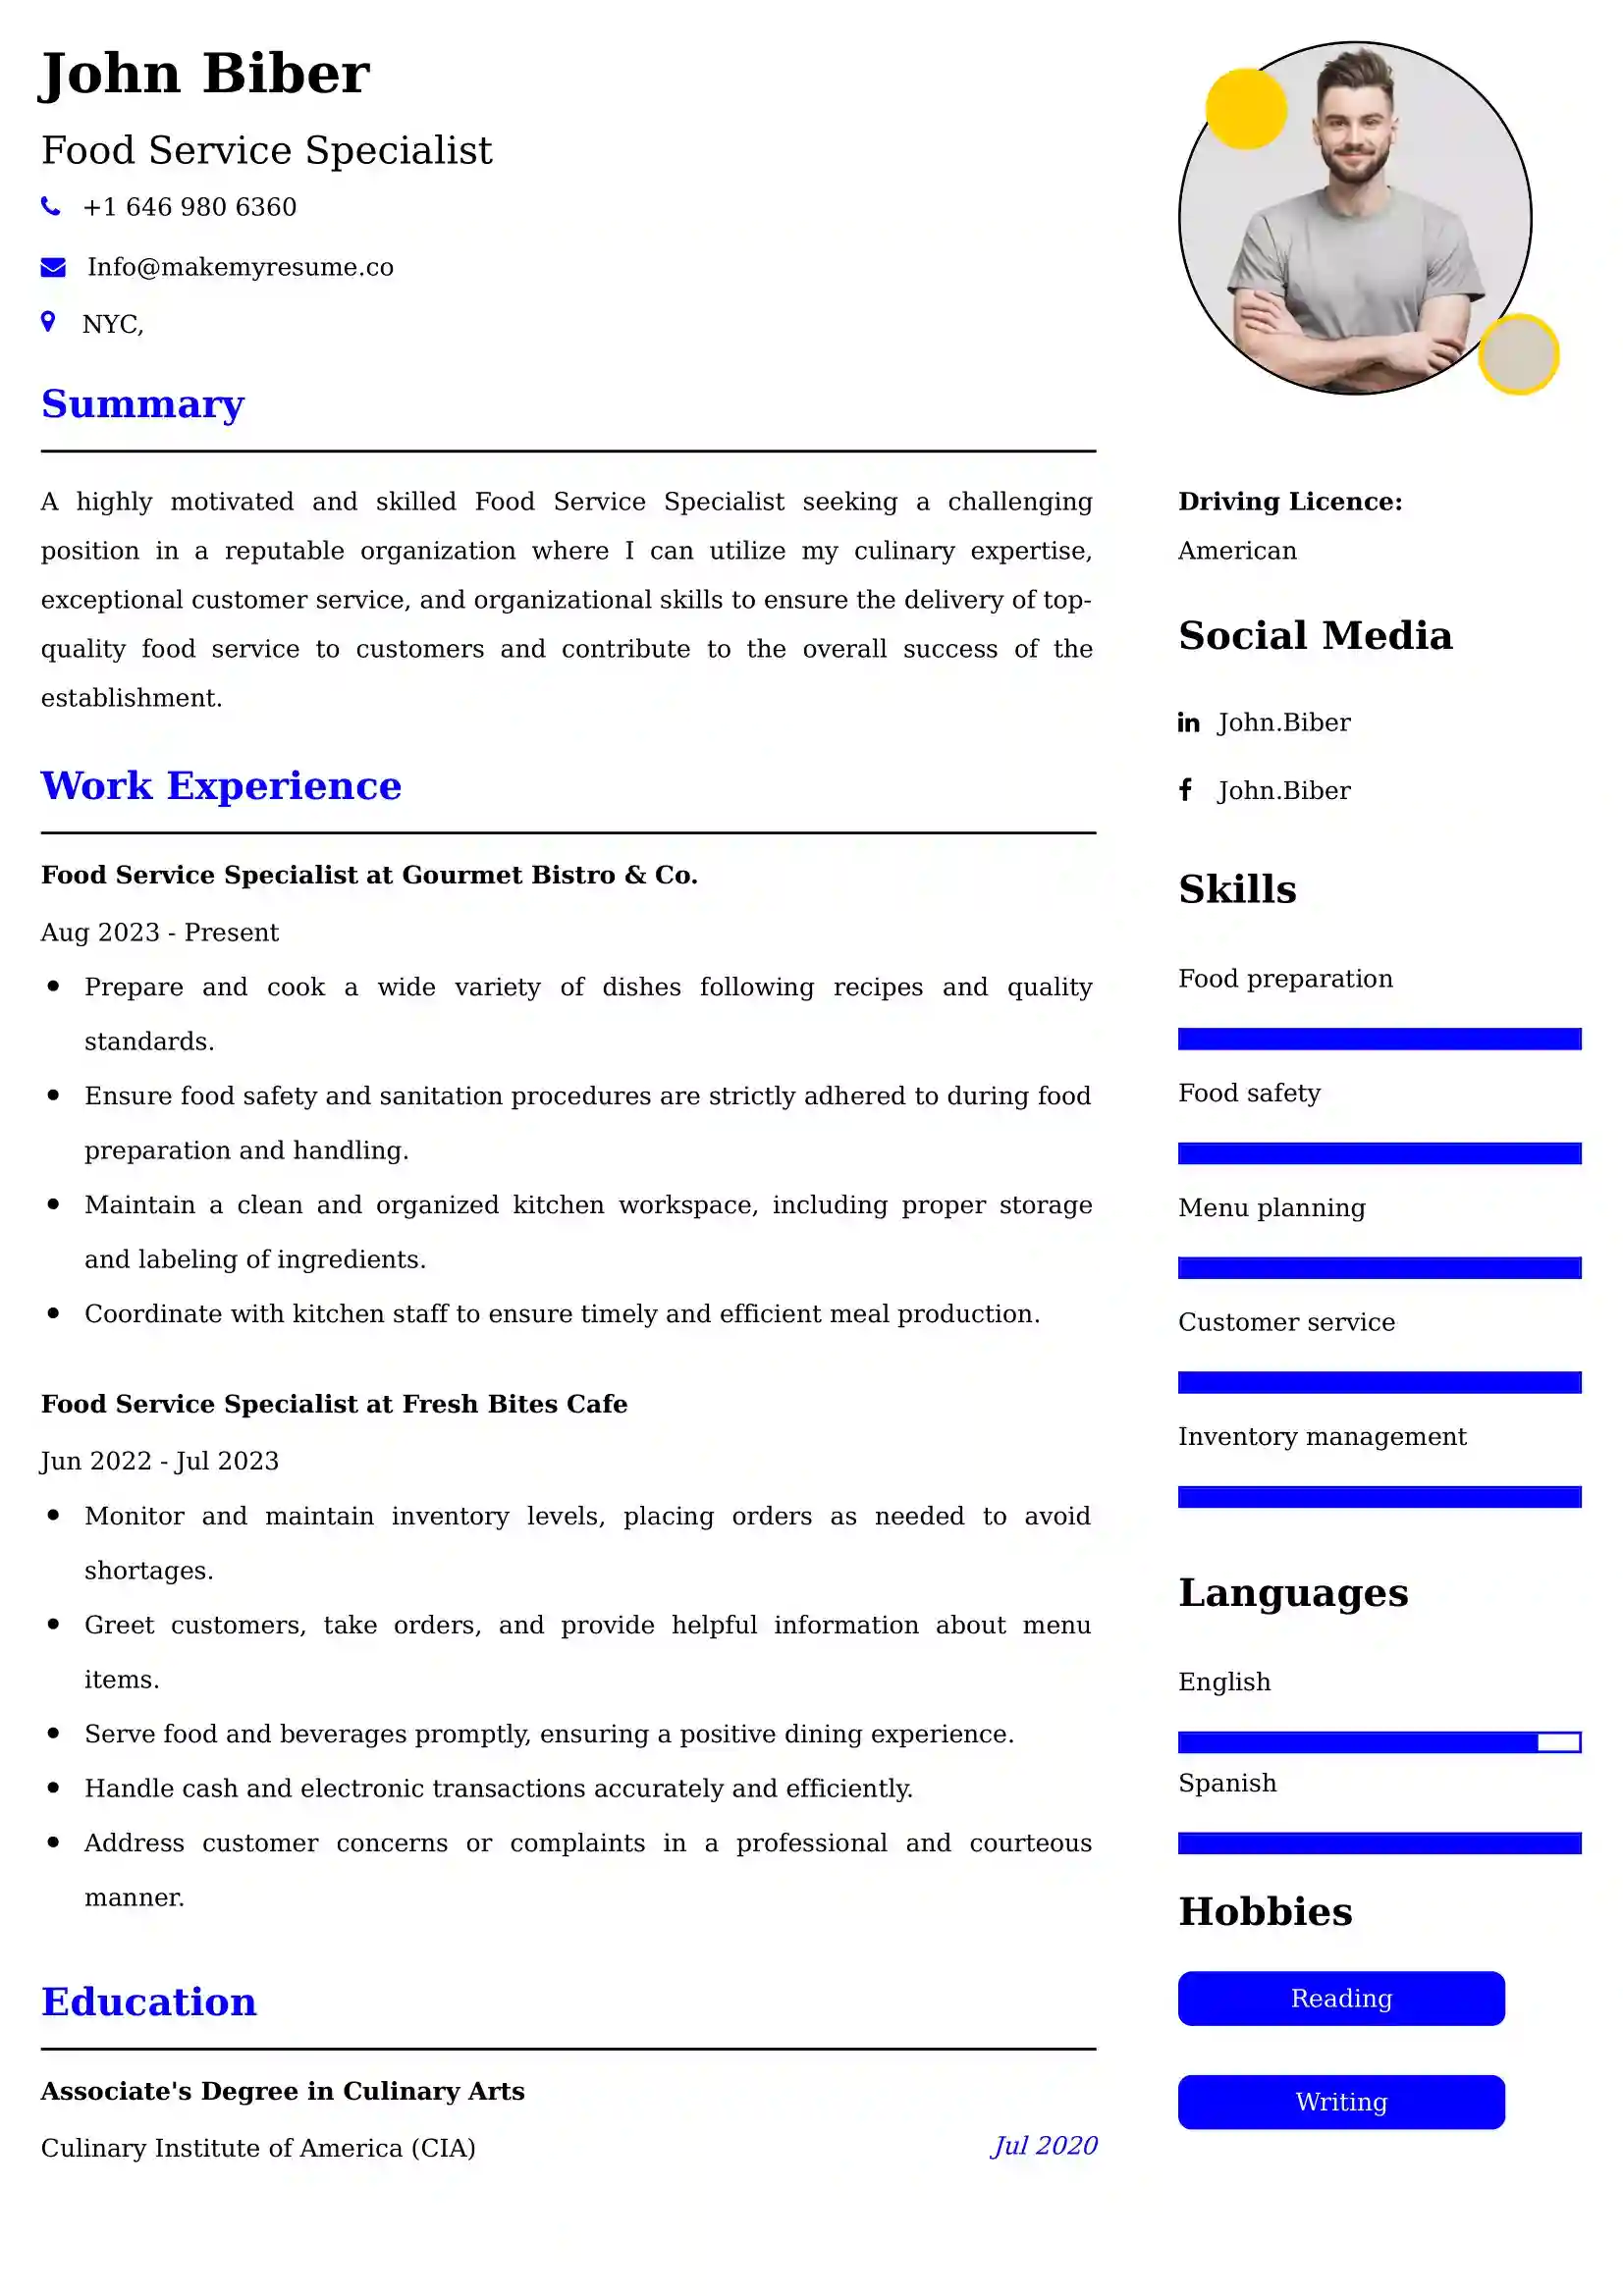 Food Service Specialist Resume Examples - UK Format, Latest Template.